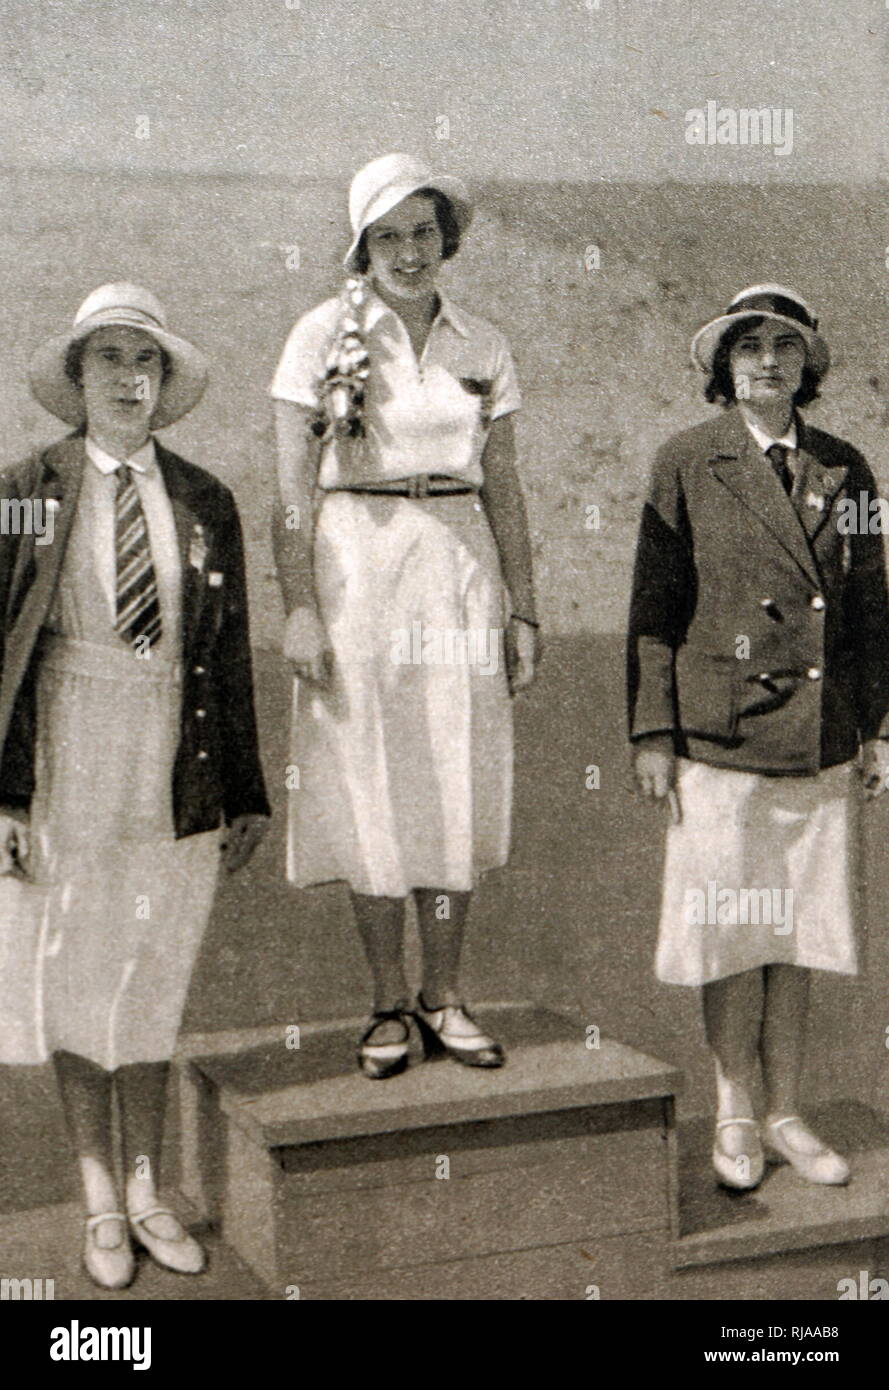 Photograph of the podium for the women's foil at the 1932 Olympic games. Ellen Müller-Preis (1912 - 2007) took gold for Austria, Heather Seymour 'Judy' Guinness (1910 - 1952) silver for Great Britain & bronze Erna Bogen-Bogáti (1906 - 2002) of Hungary. Stock Photo